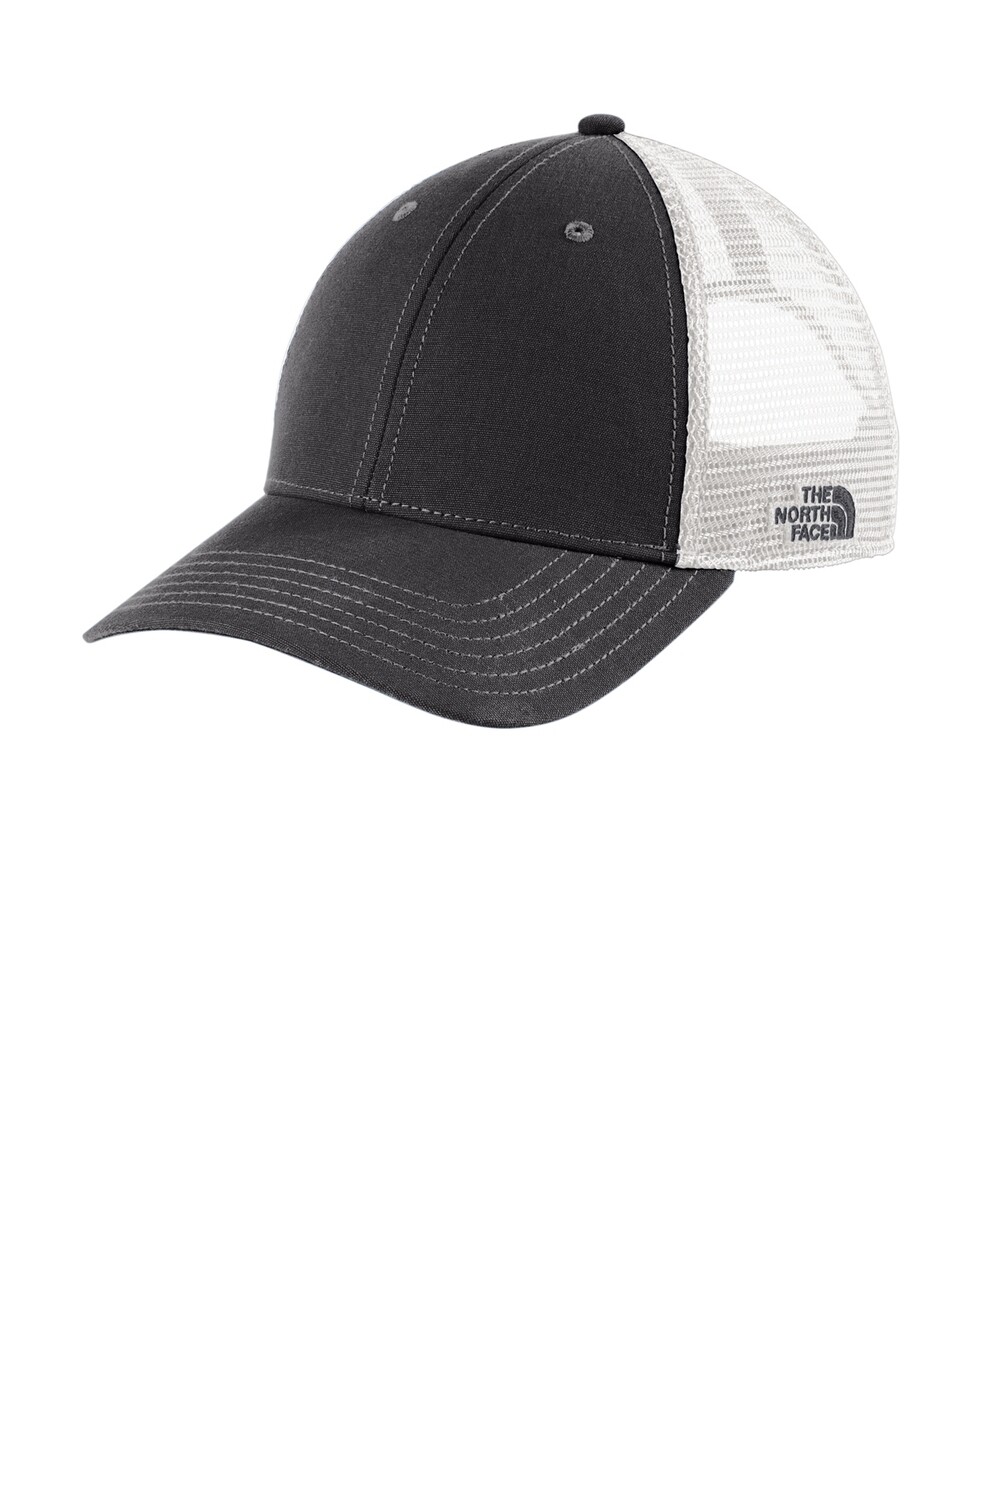 The North Face® Ultimate Trucker Cap | Embroideryab